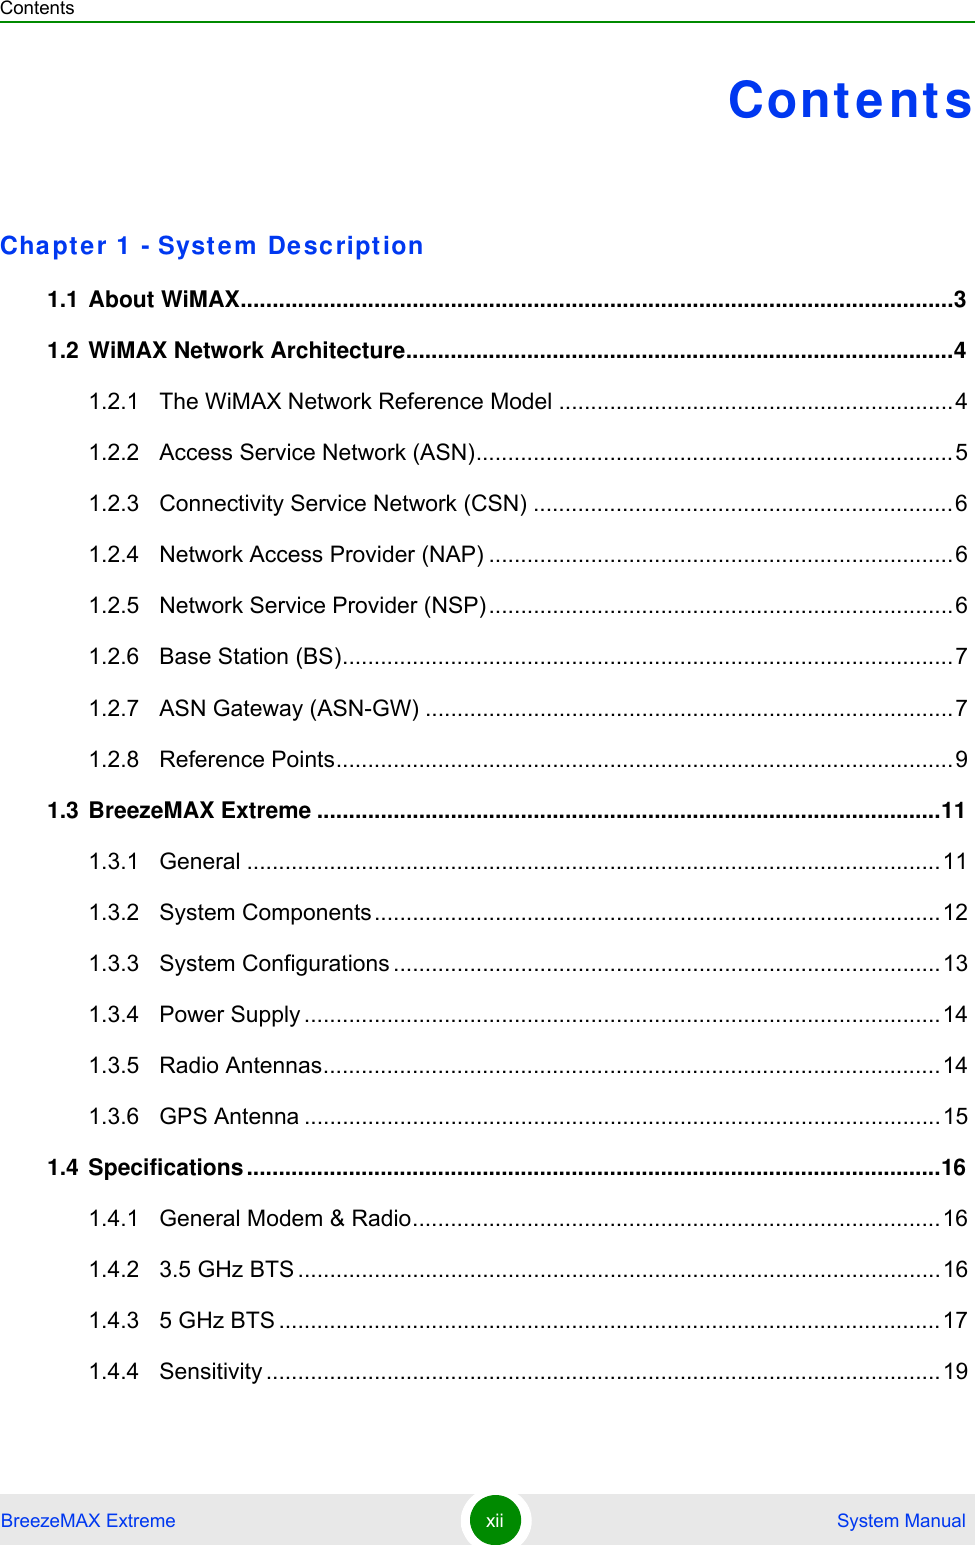 ContentsBreezeMAX Extreme xii  System ManualContentsChapter 1 - System Description1.1 About WiMAX................................................................................................................31.2 WiMAX Network Architecture......................................................................................41.2.1 The WiMAX Network Reference Model ..............................................................41.2.2 Access Service Network (ASN)...........................................................................51.2.3 Connectivity Service Network (CSN) ..................................................................61.2.4 Network Access Provider (NAP) .........................................................................61.2.5 Network Service Provider (NSP).........................................................................61.2.6 Base Station (BS)................................................................................................71.2.7 ASN Gateway (ASN-GW) ...................................................................................71.2.8 Reference Points.................................................................................................91.3 BreezeMAX Extreme ..................................................................................................111.3.1 General .............................................................................................................111.3.2 System Components.........................................................................................121.3.3 System Configurations ......................................................................................131.3.4 Power Supply ....................................................................................................141.3.5 Radio Antennas.................................................................................................141.3.6 GPS Antenna ....................................................................................................151.4 Specifications.............................................................................................................161.4.1 General Modem &amp; Radio...................................................................................161.4.2 3.5 GHz BTS .....................................................................................................161.4.3 5 GHz BTS ........................................................................................................171.4.4 Sensitivity ..........................................................................................................19